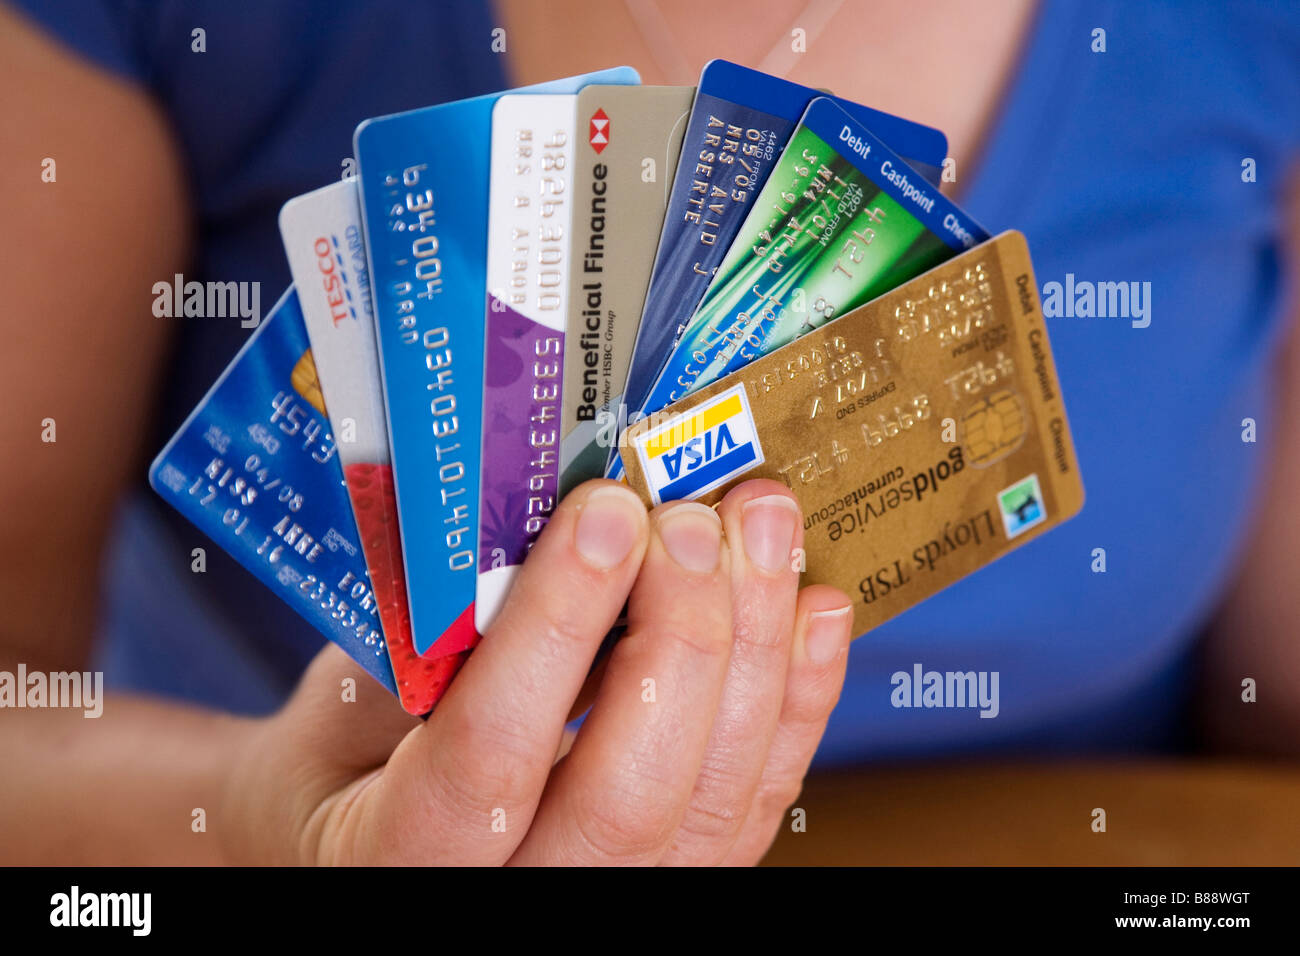 woman holding credit cards Stock Photo